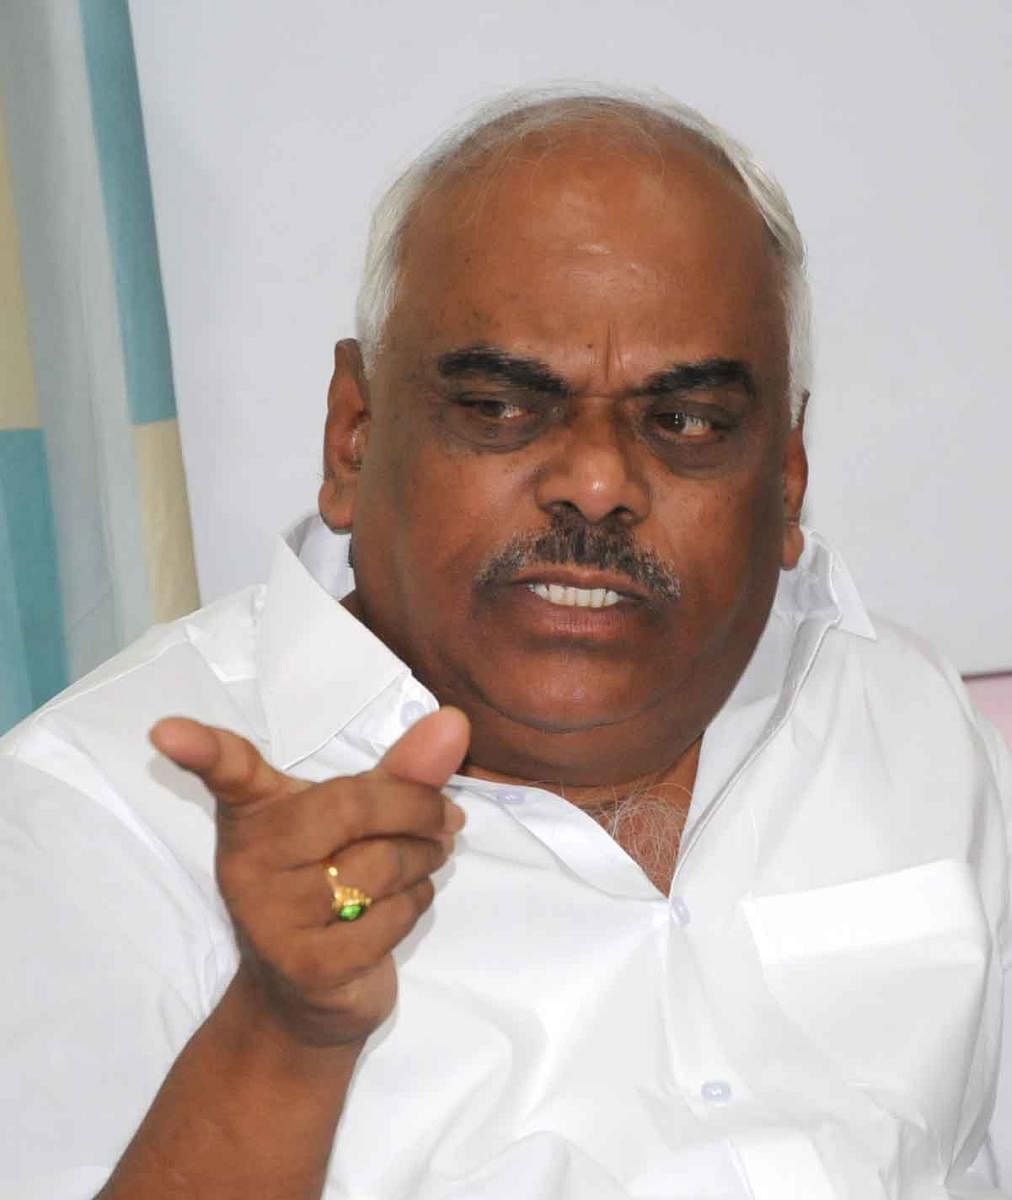 The Supreme Court on Friday restrained Karnataka Speaker K R Ramesh Kumar from taking any decision on the resignation and disqualification of 10 rebel MLAs of the state's ruling Congress-JD(S) coalition till next week Tuesday. DH file photo